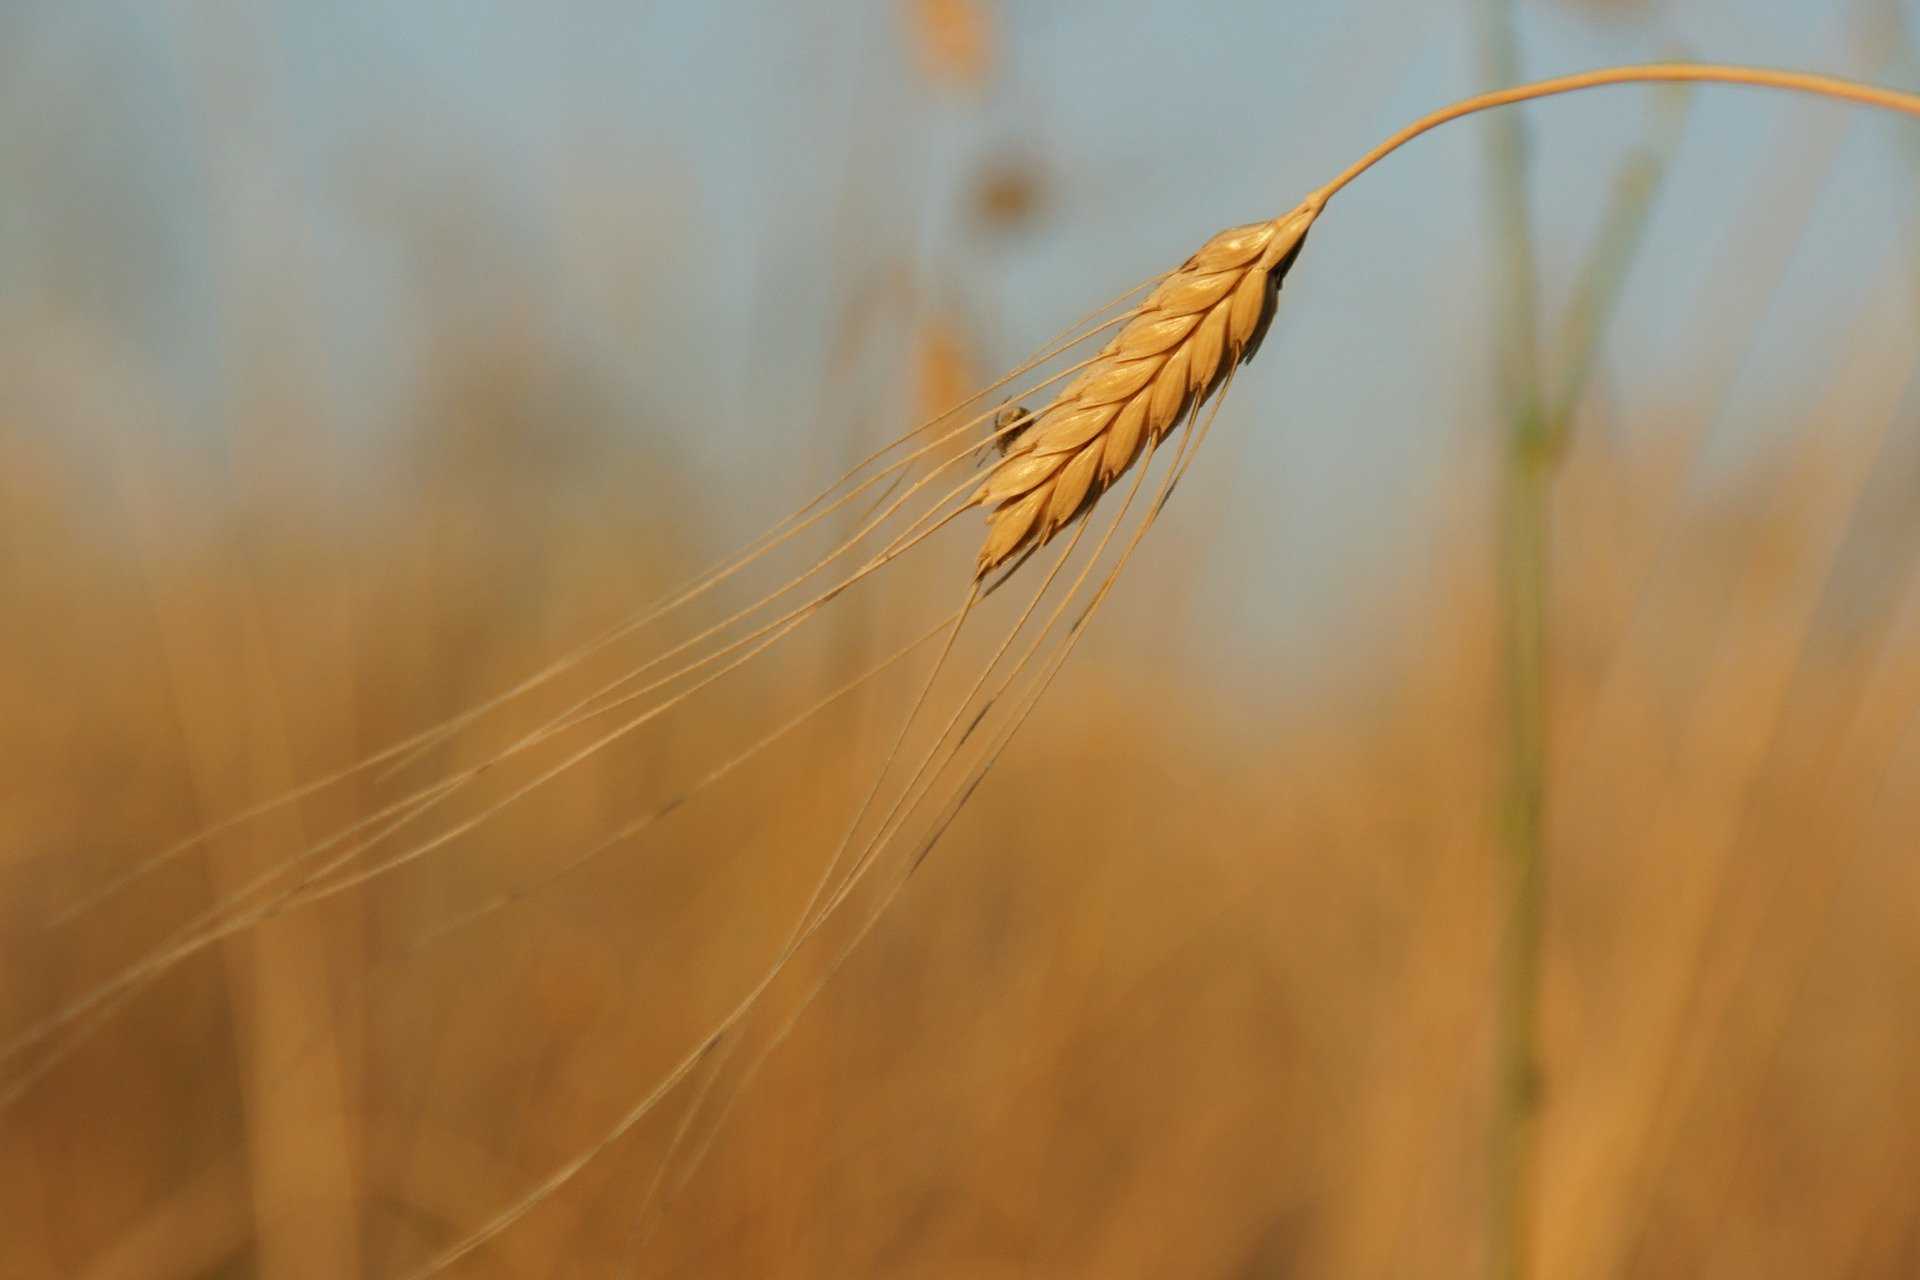 Minor cereals such as einkorn can add to the diversity of our food production.